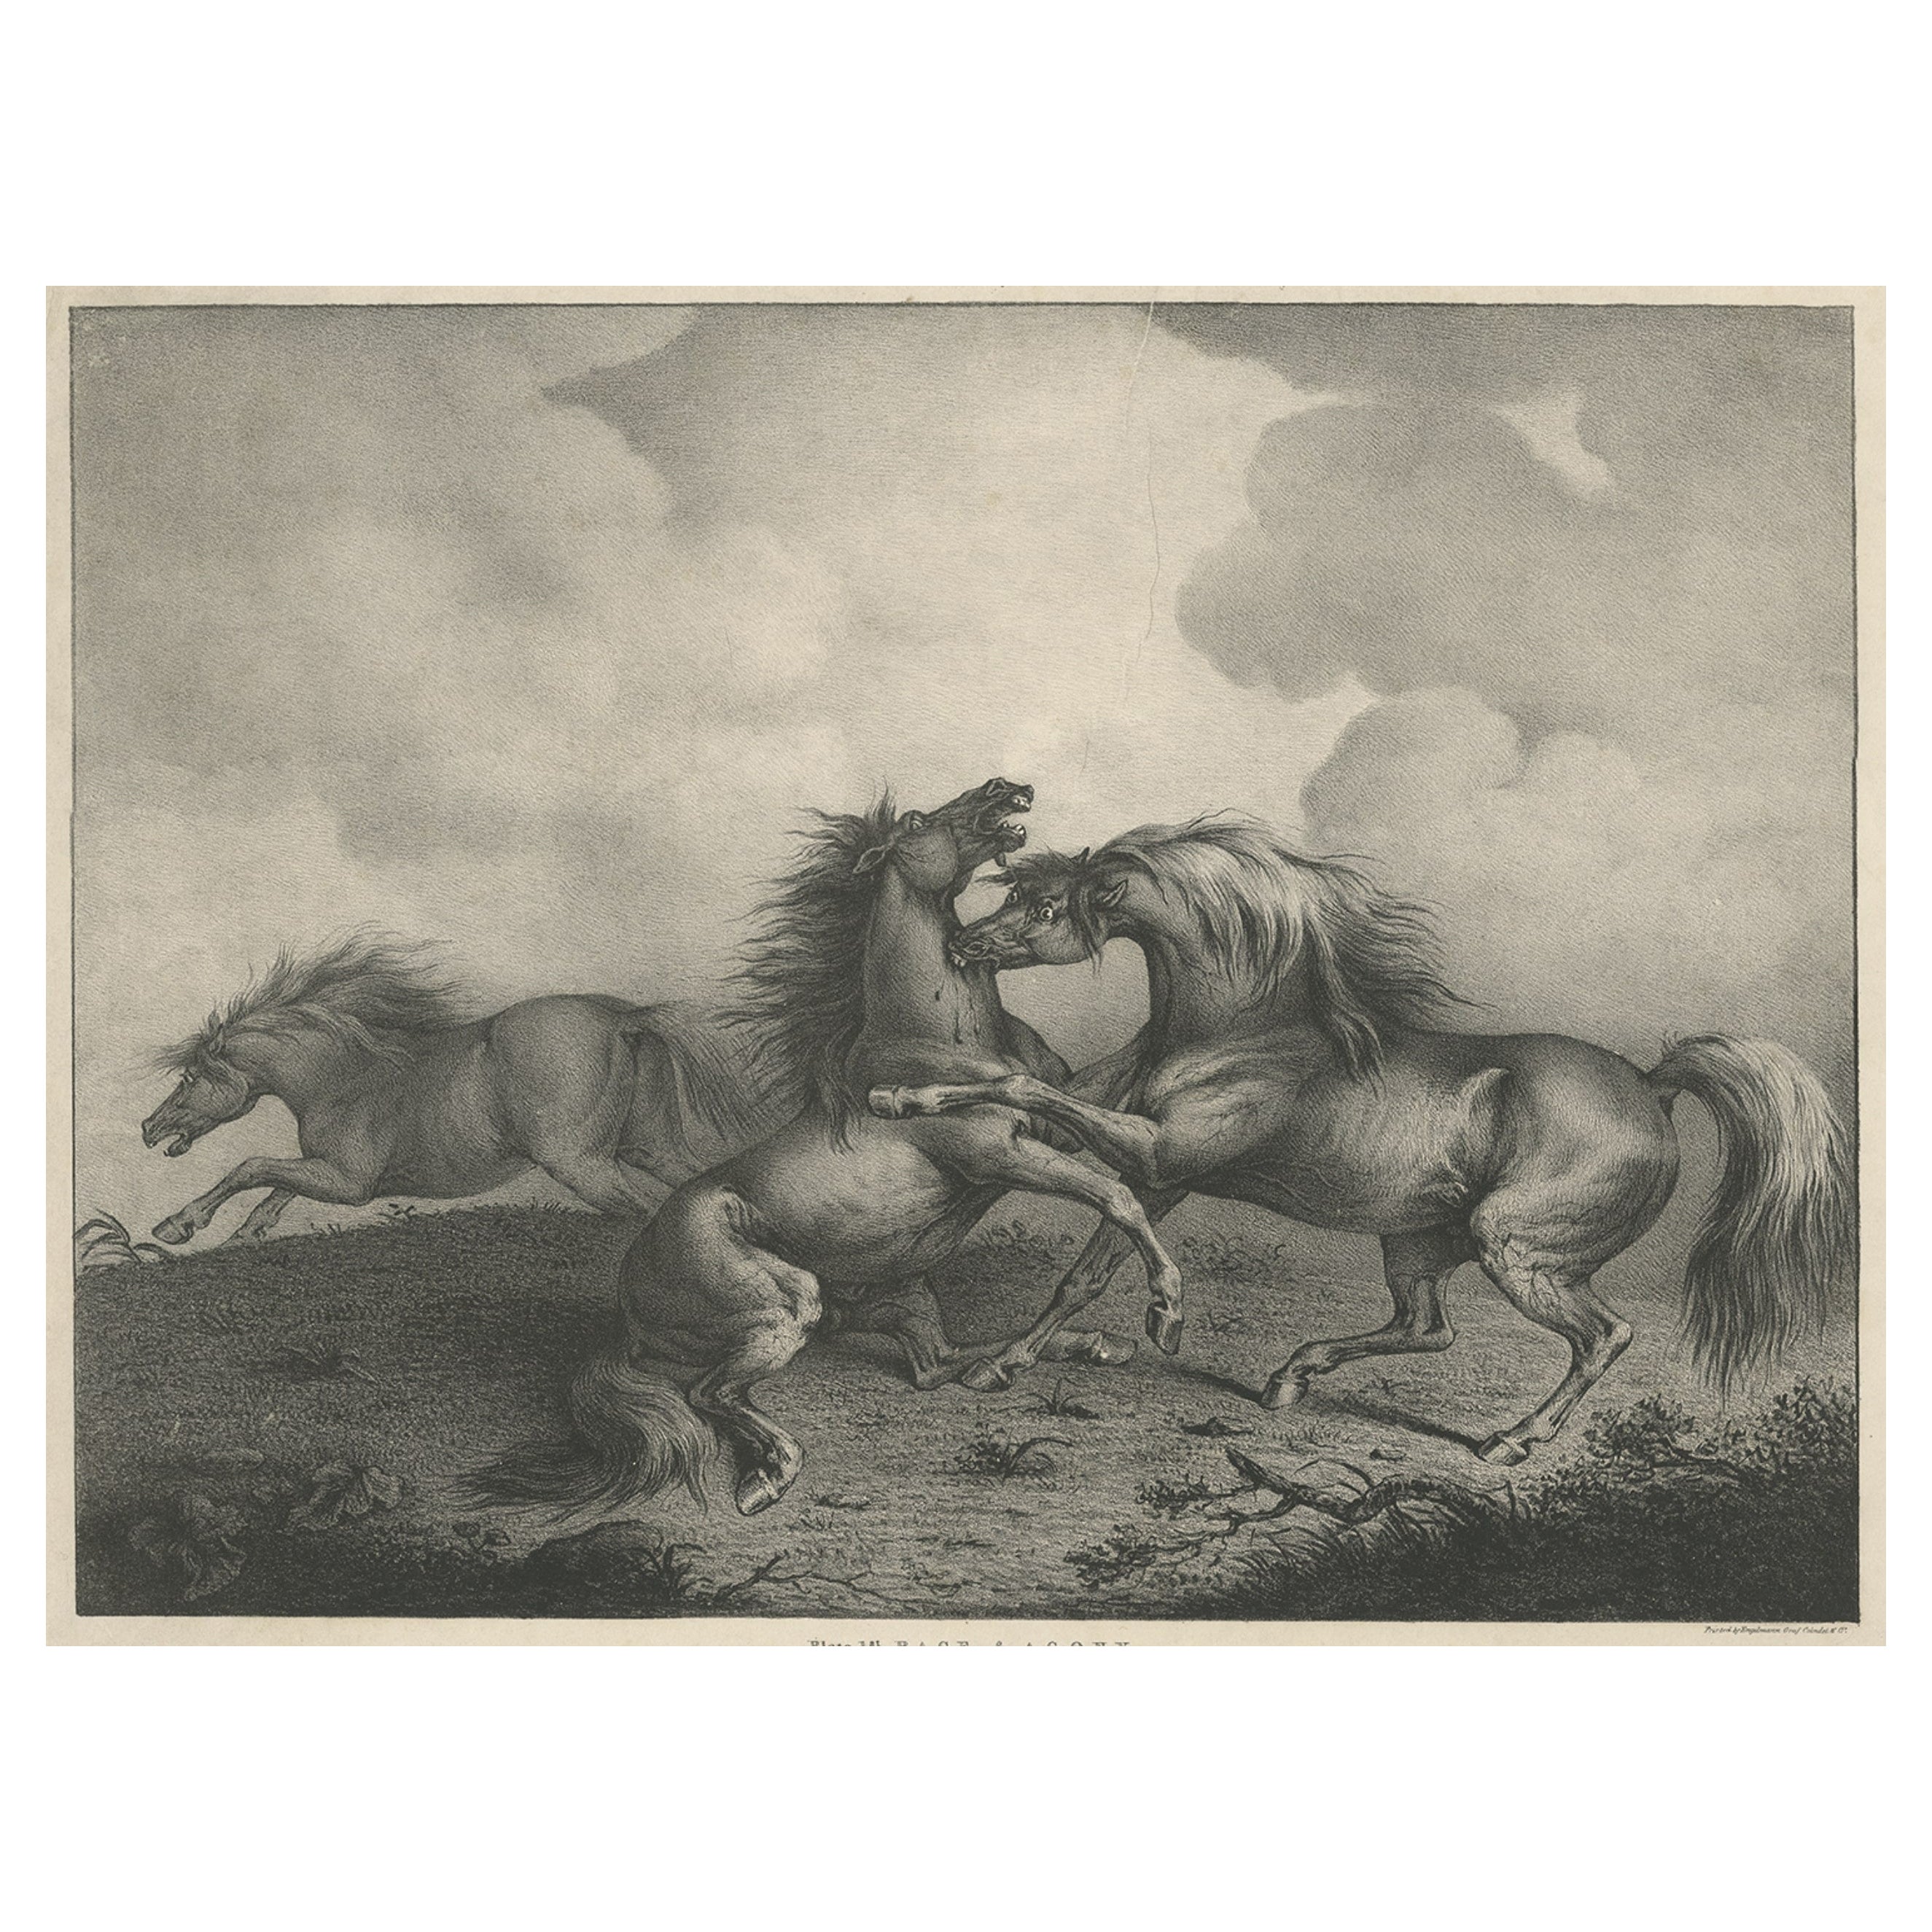 Original Antique Lithograph of a Horse Showing the Passion 'Rage & Agony', 1827